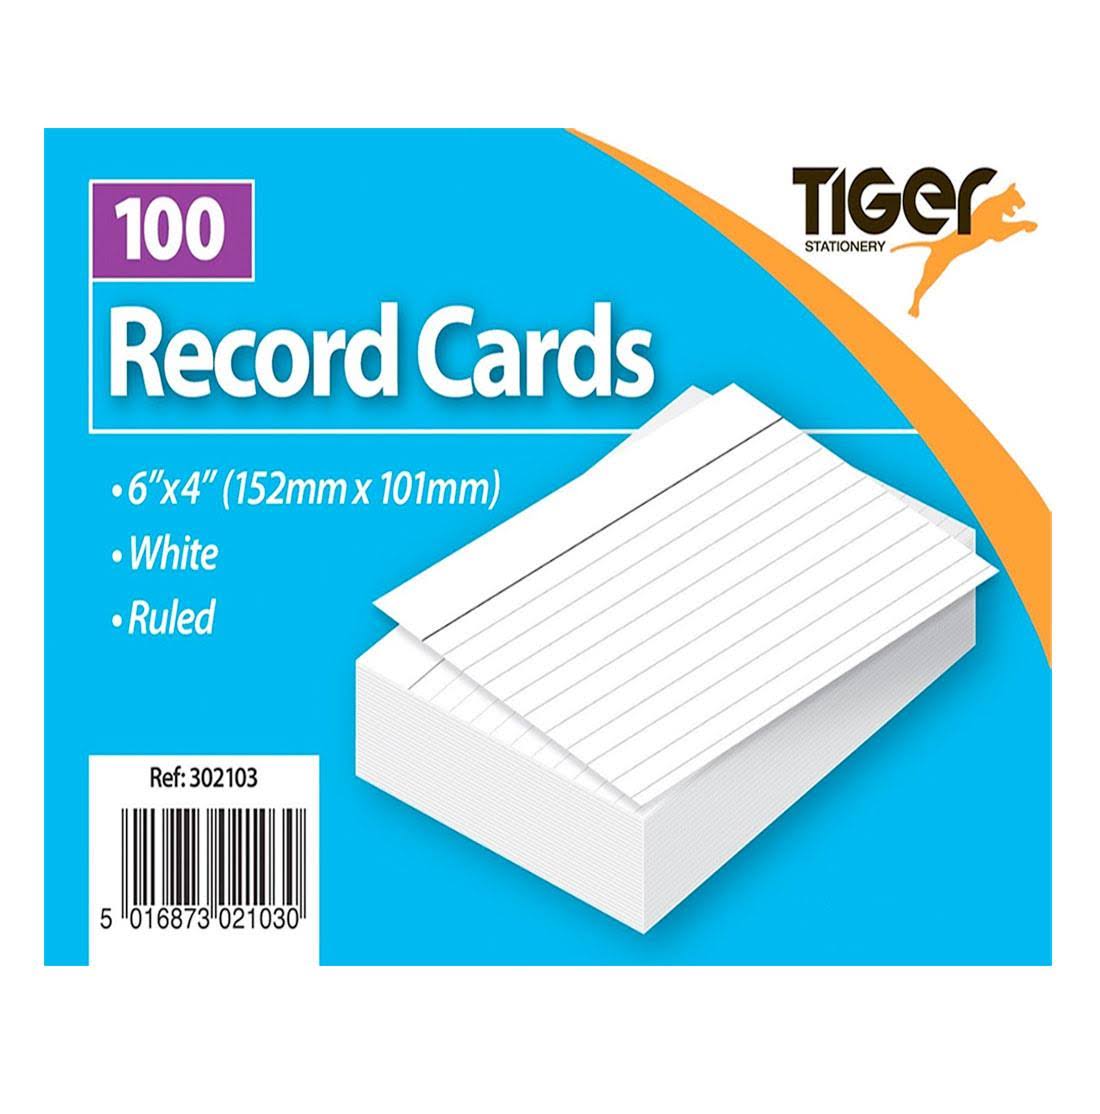 100 Record Cards - 6x4"